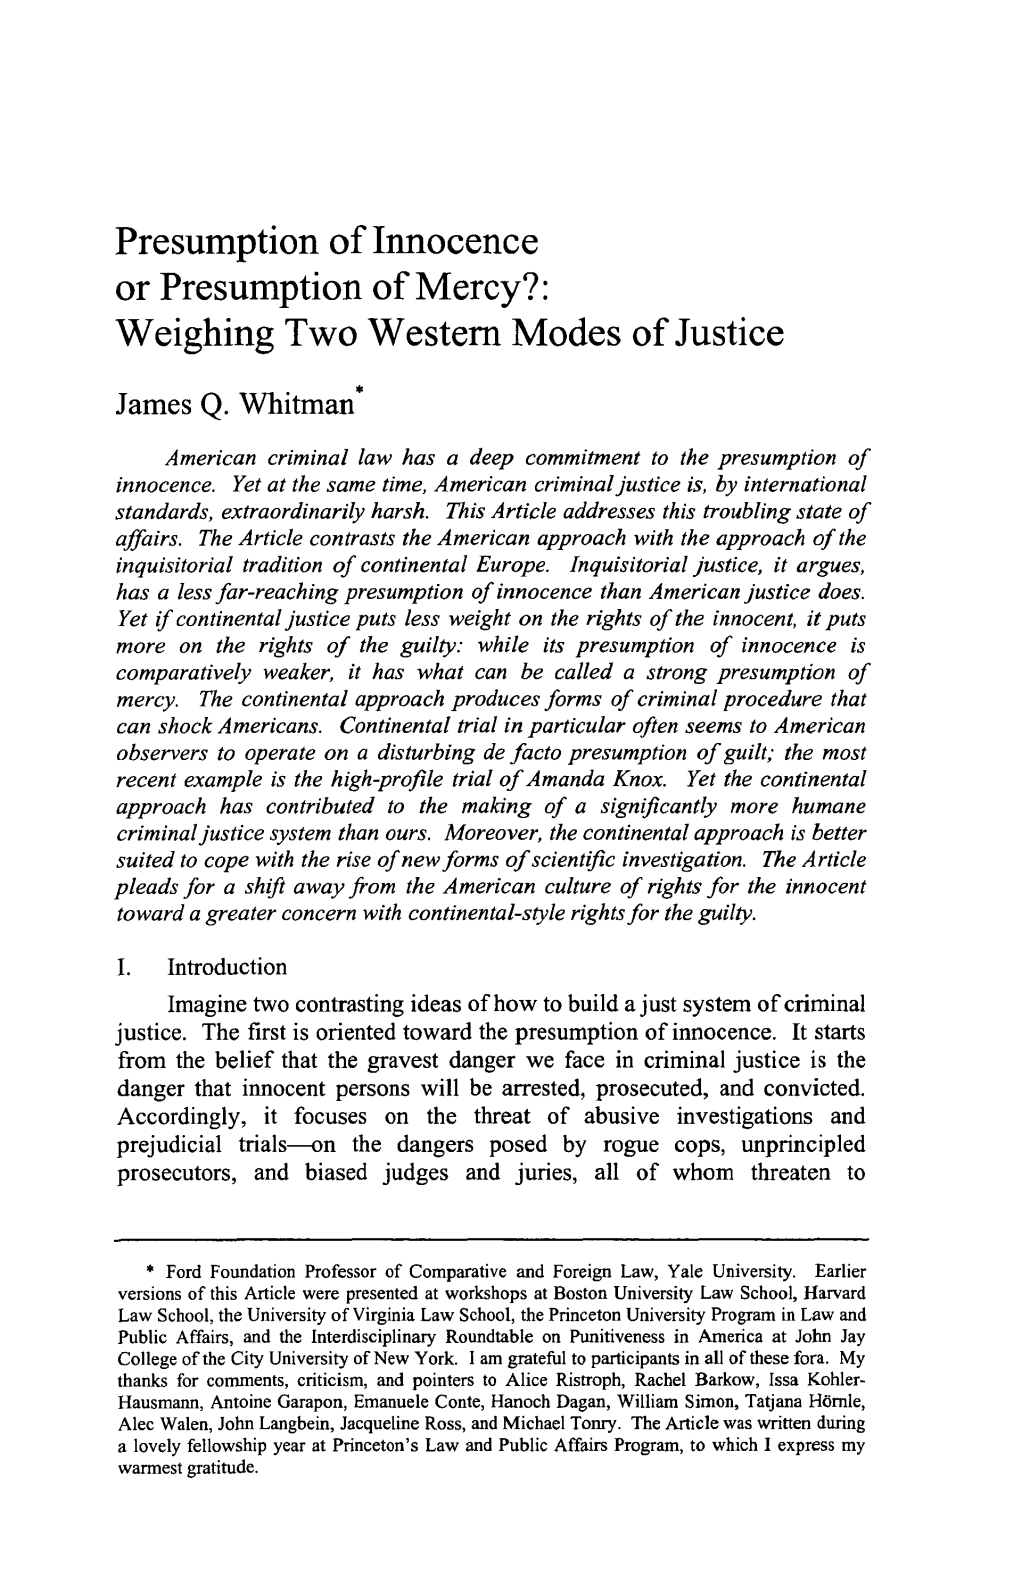 Weighing Two Western Modes of Justice